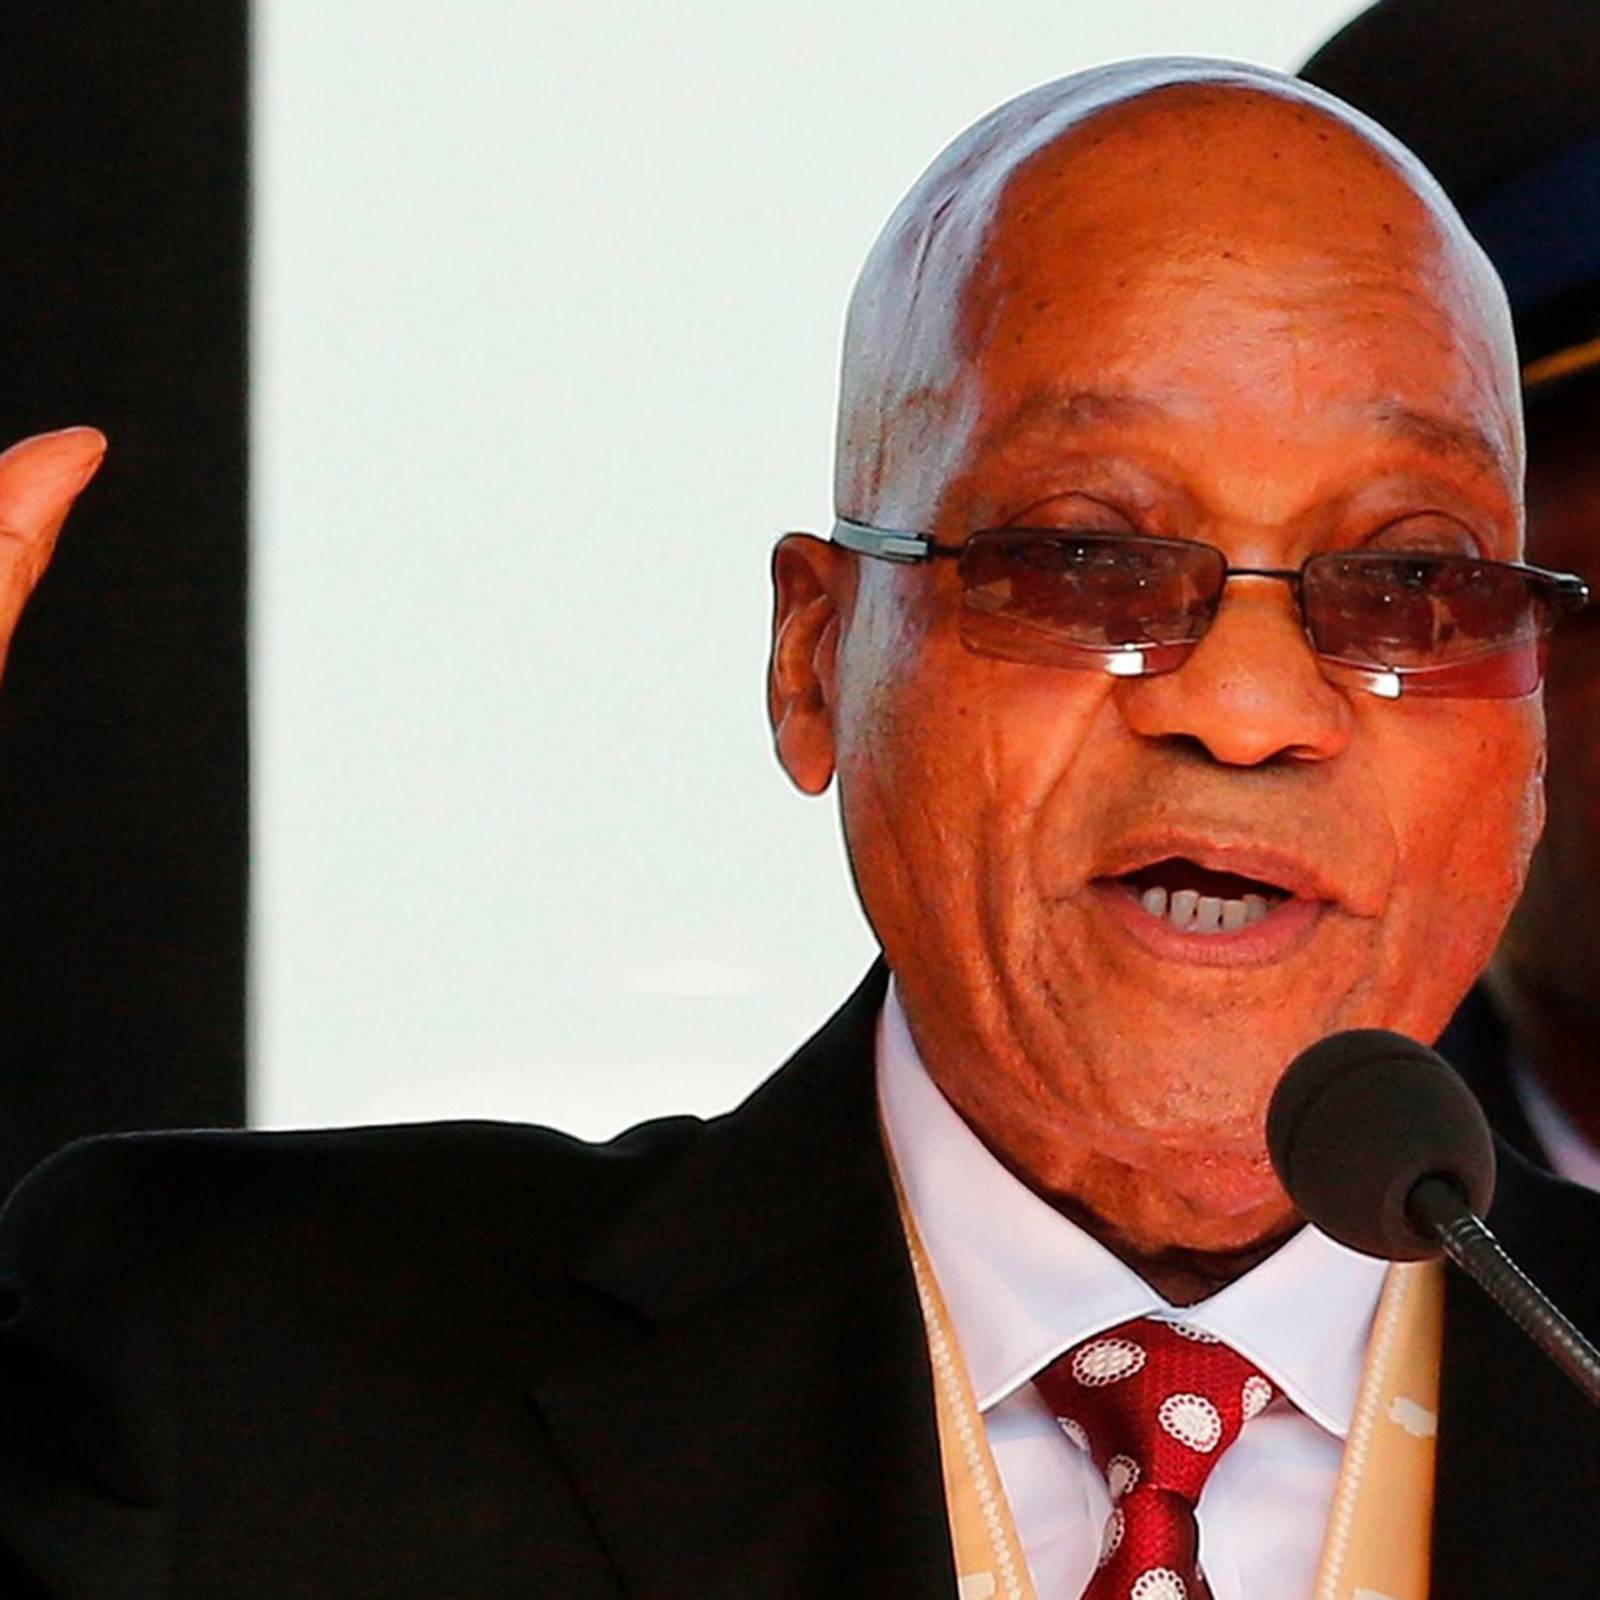 Jacob Zuma withdraws support for ANC in run-up to 2024 South